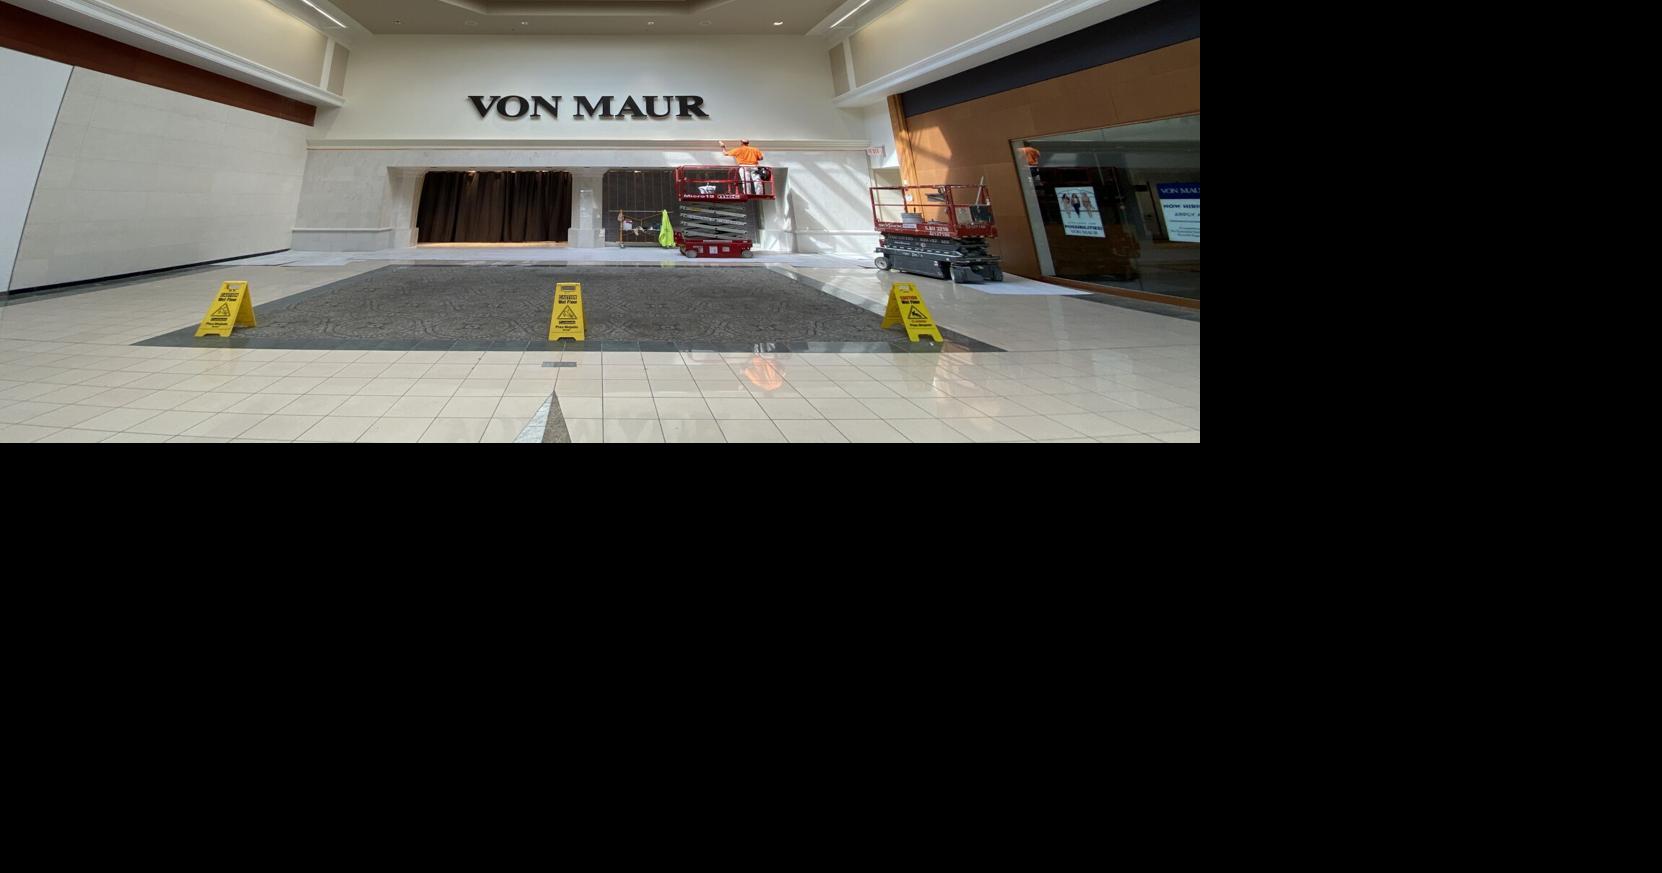 Watch now: Take a peek inside the Von Maur store at West Towne Mall 